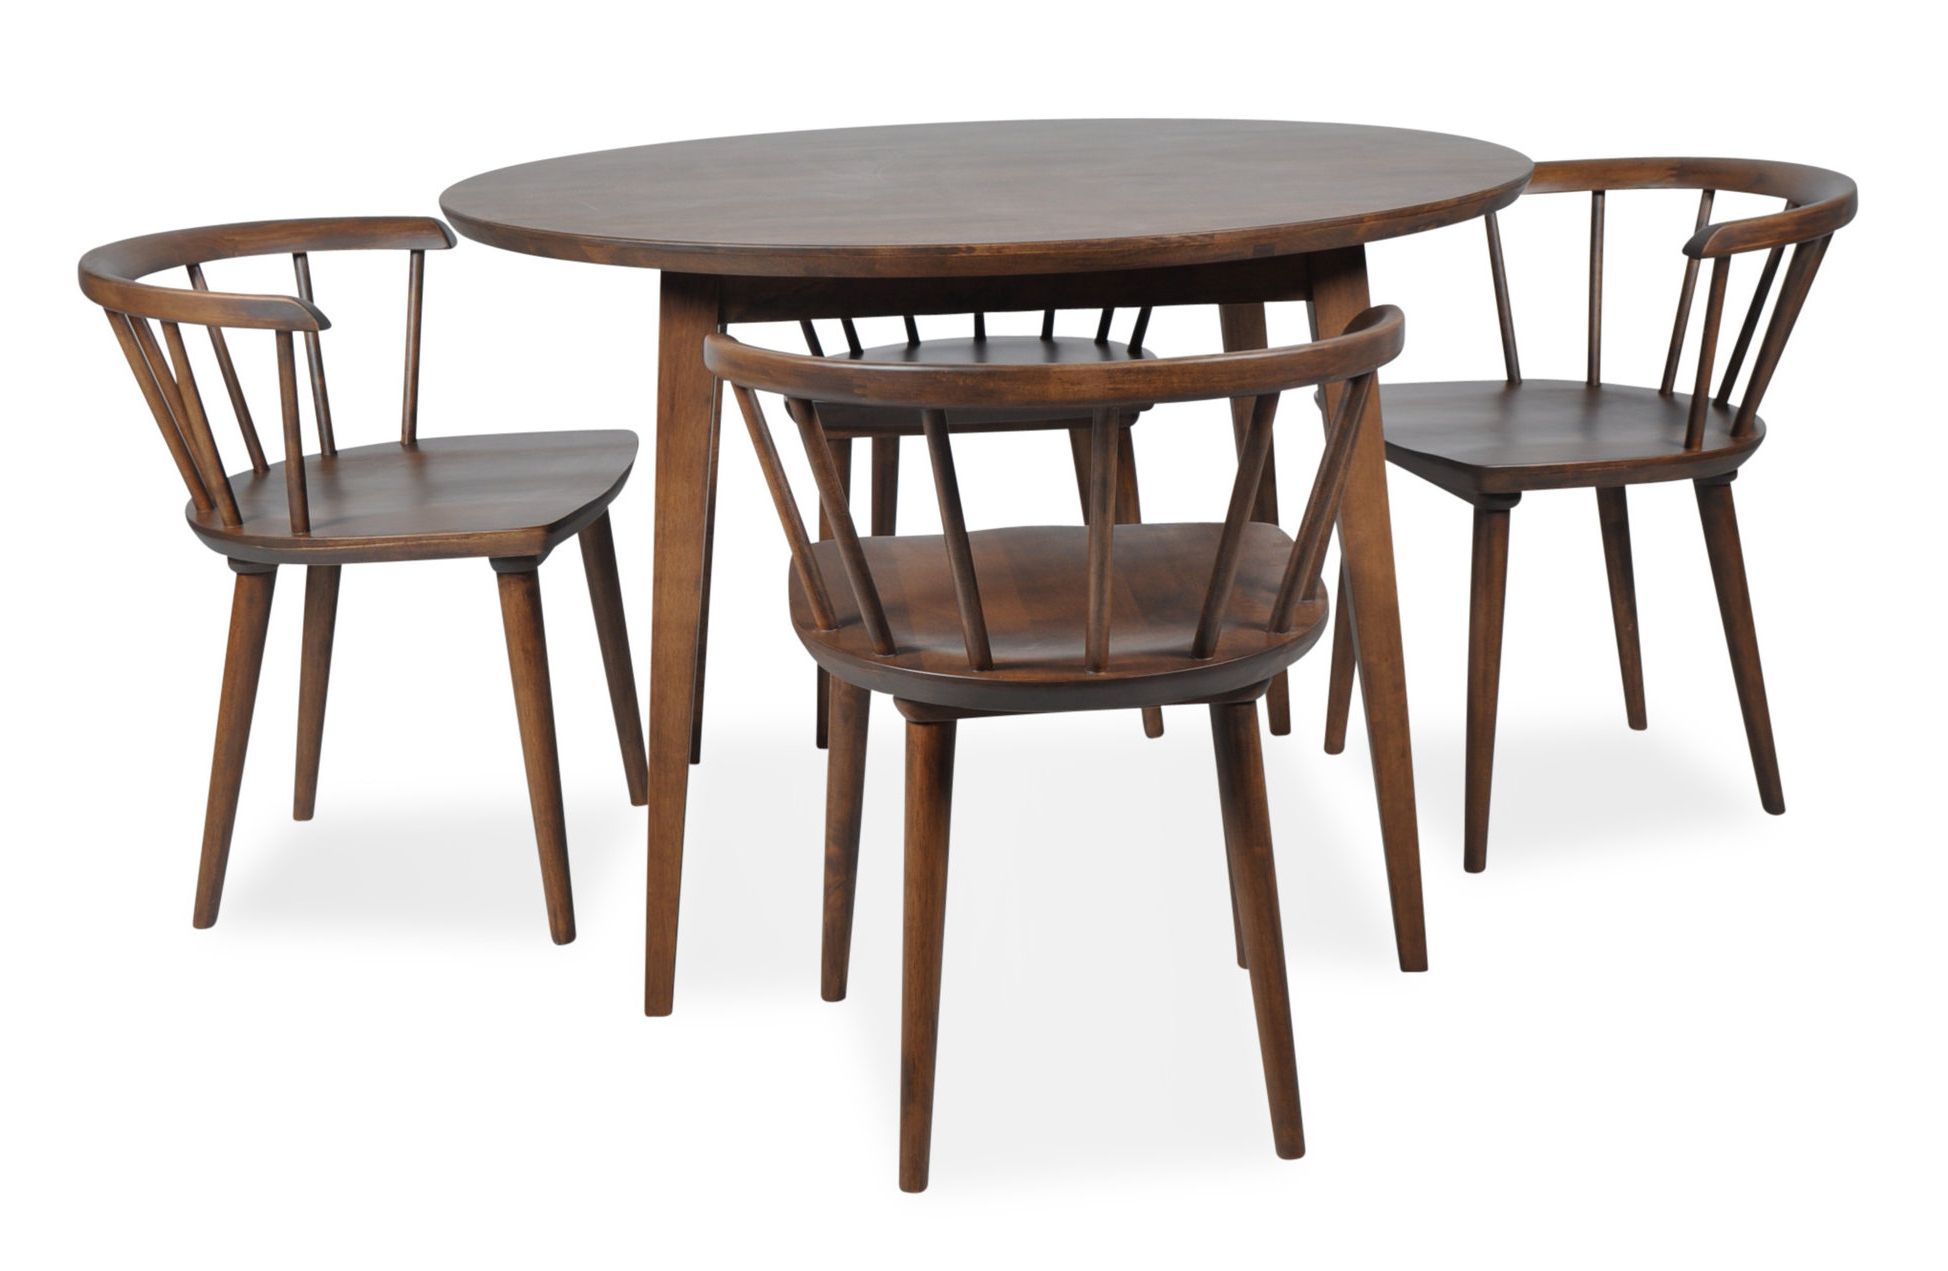 5 Piece Breakfast Nook Dining Sets For Fashionable Burgan 5 Piece Solid Wood Breakfast Nook Dining Set & Reviews (View 15 of 25)